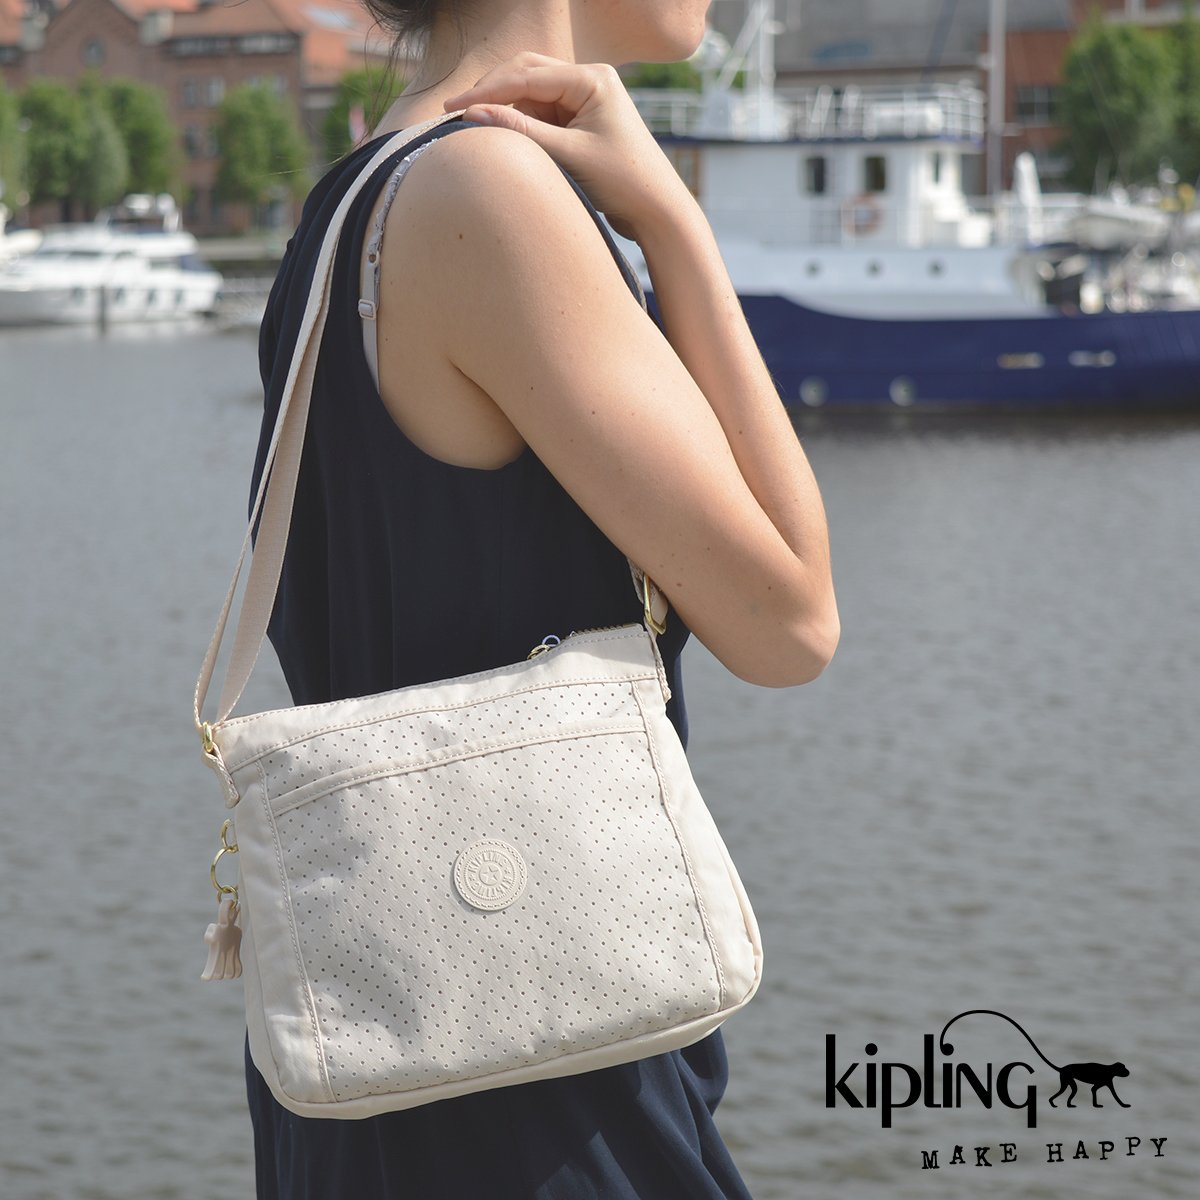 Kipling on Twitter: "Follow us on Instagram to get your daily dose of #bags and inspiration. Share pictures with #SheWearsKipling https://t.co/QVnDRczPm8" / Twitter